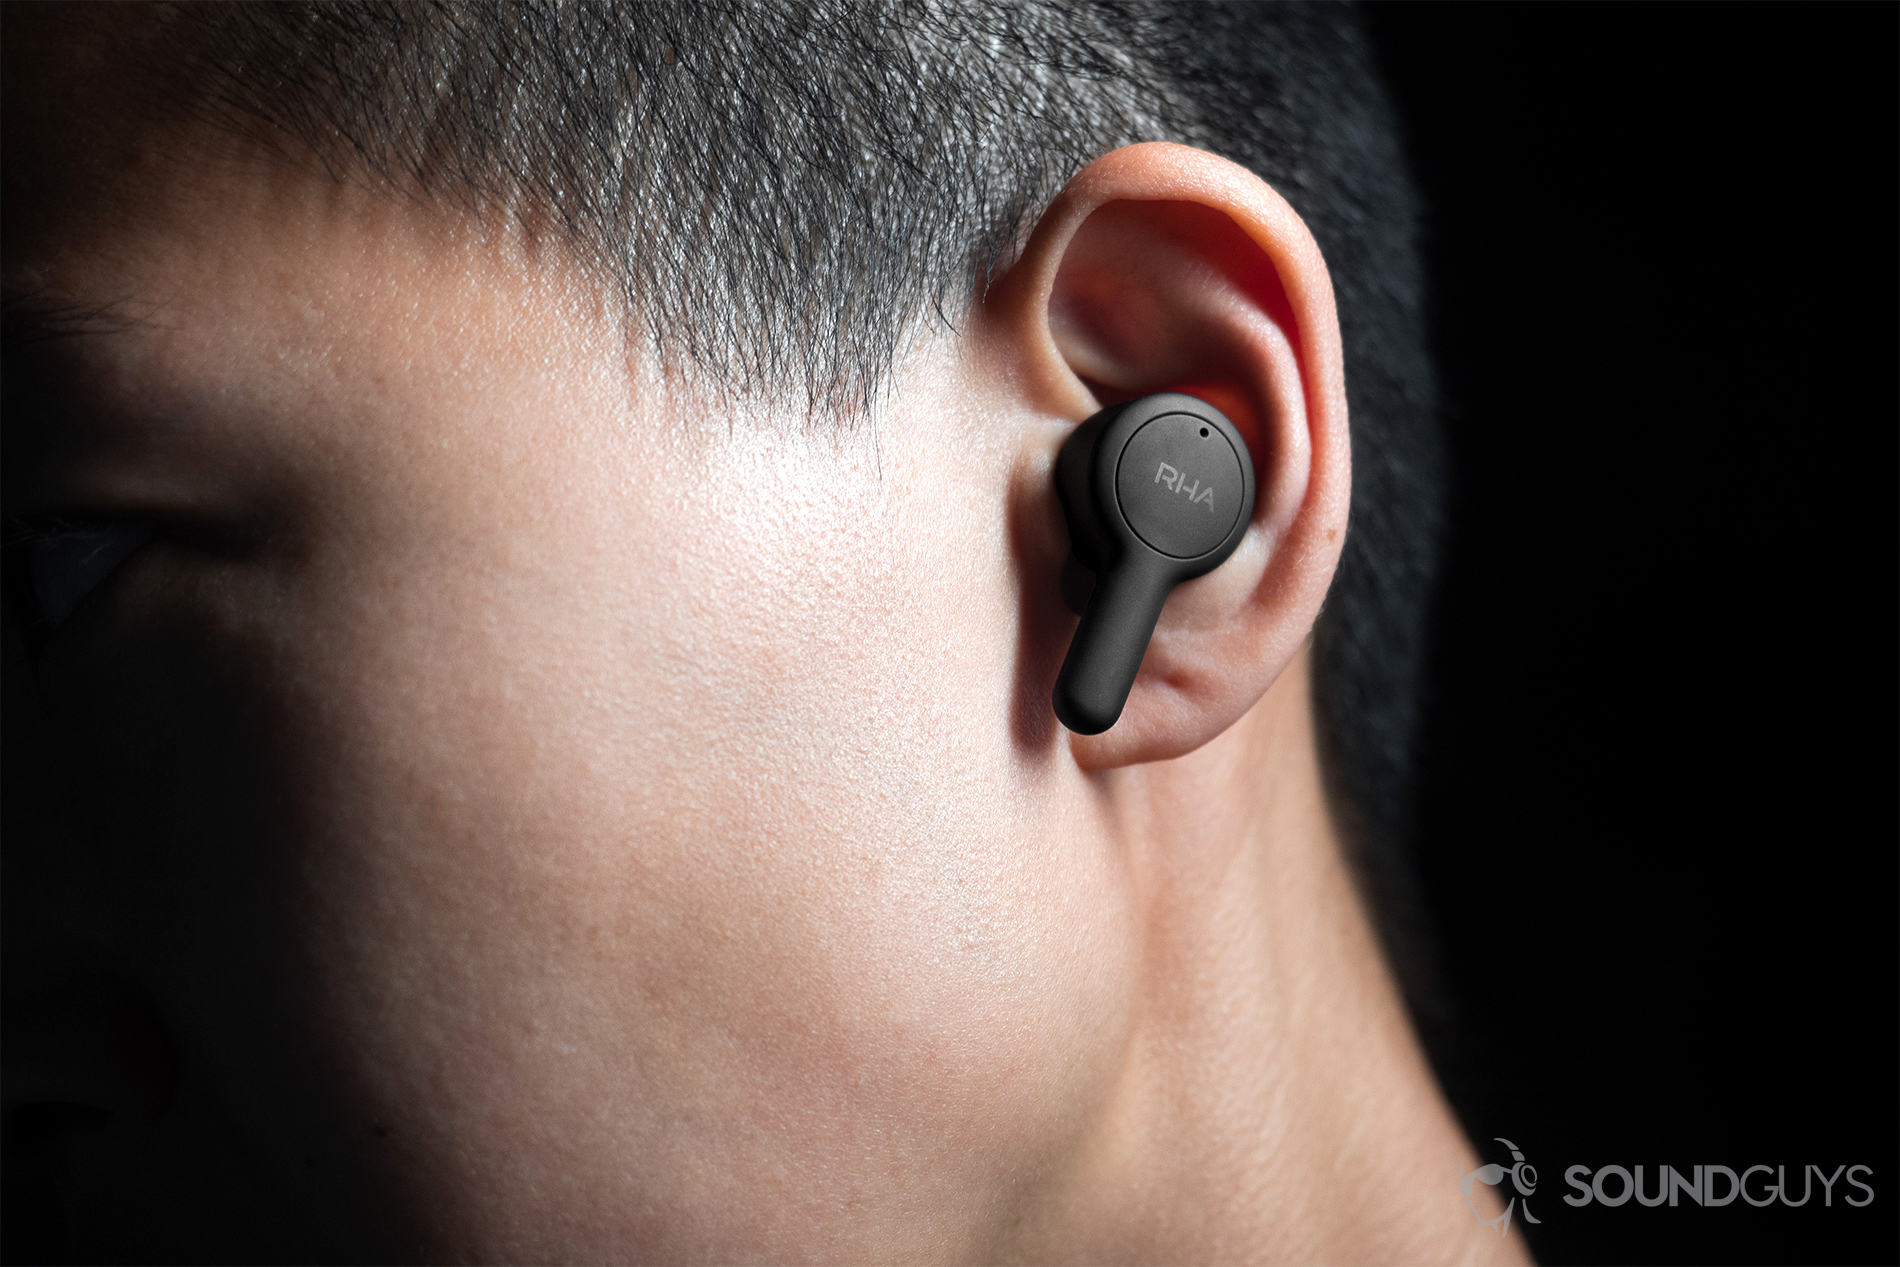 RHA TrueConnect true wireless earbuds (left) being worn by a woman, it protrudes a bit from the ear with the stem angled downward.